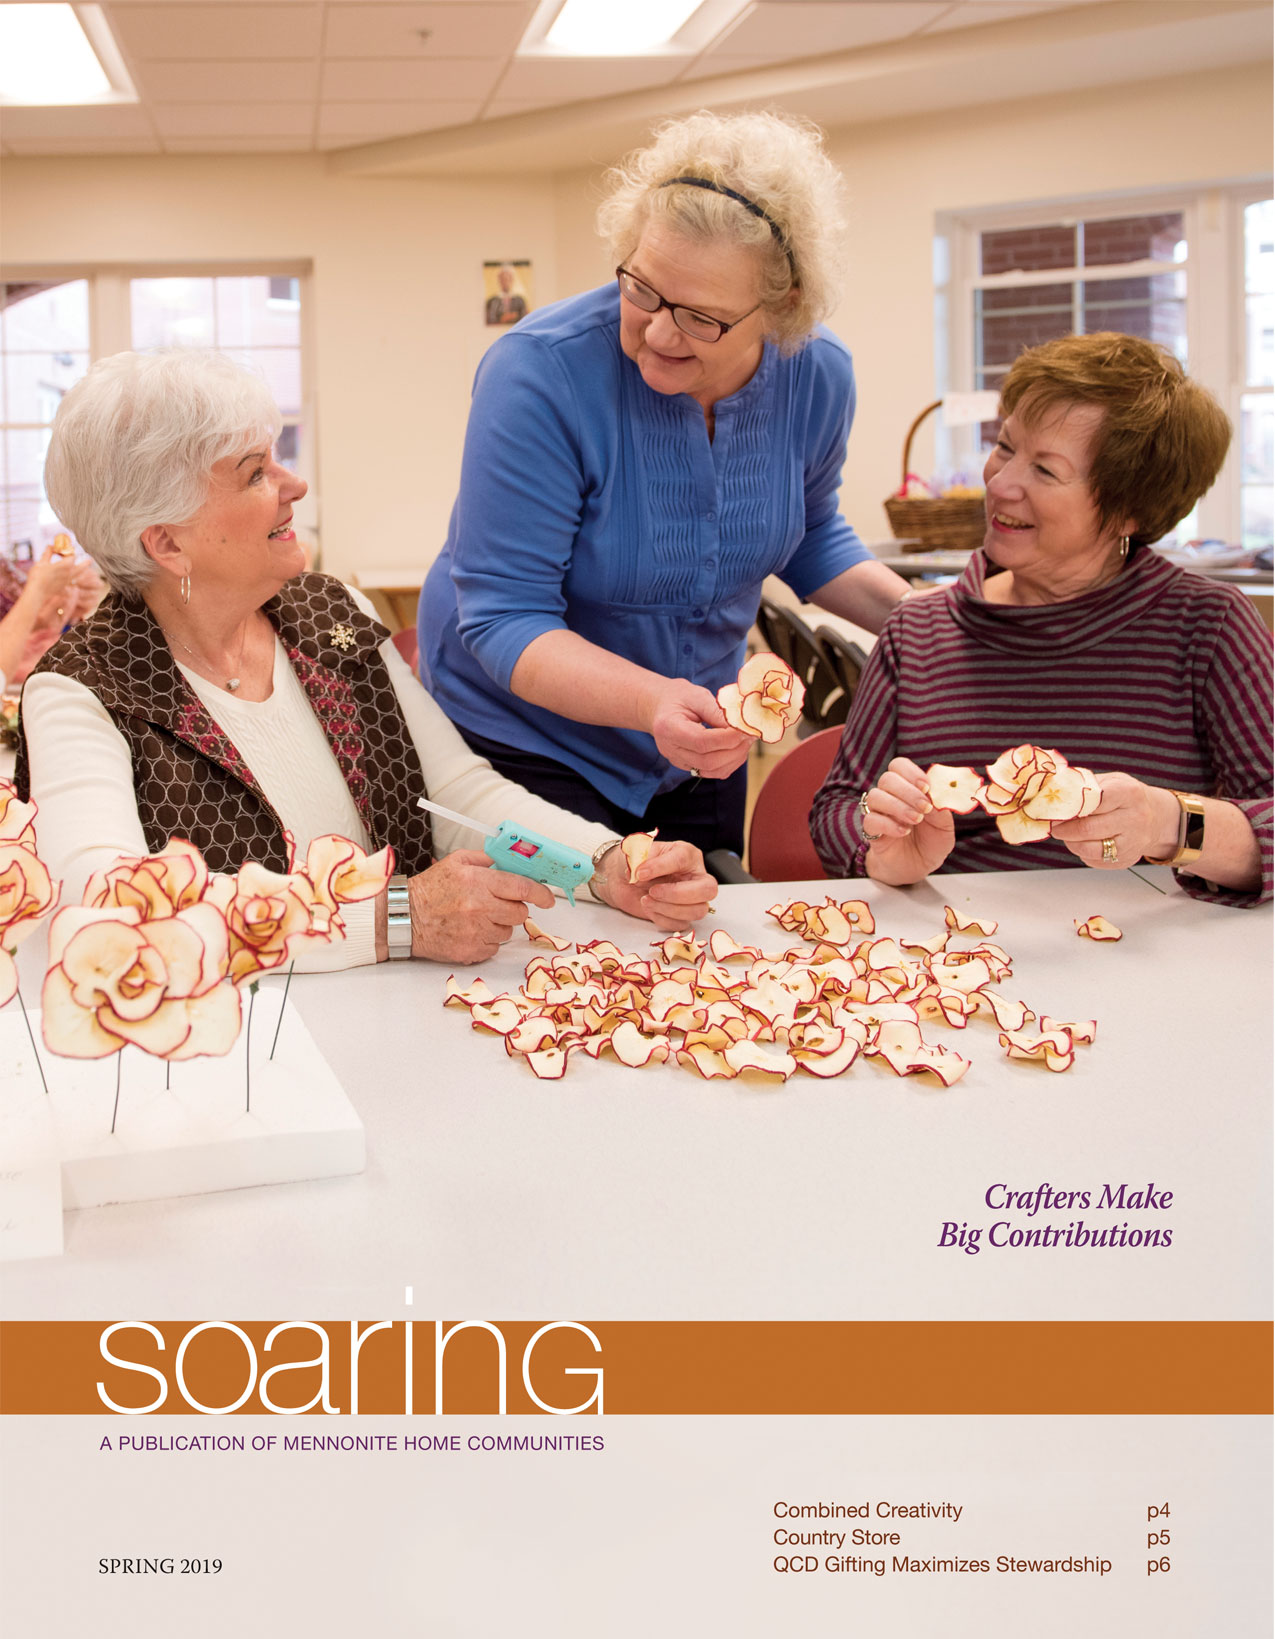 Three women enjoying crafts on the cover of the Spring 2019 Soaring Newsletter